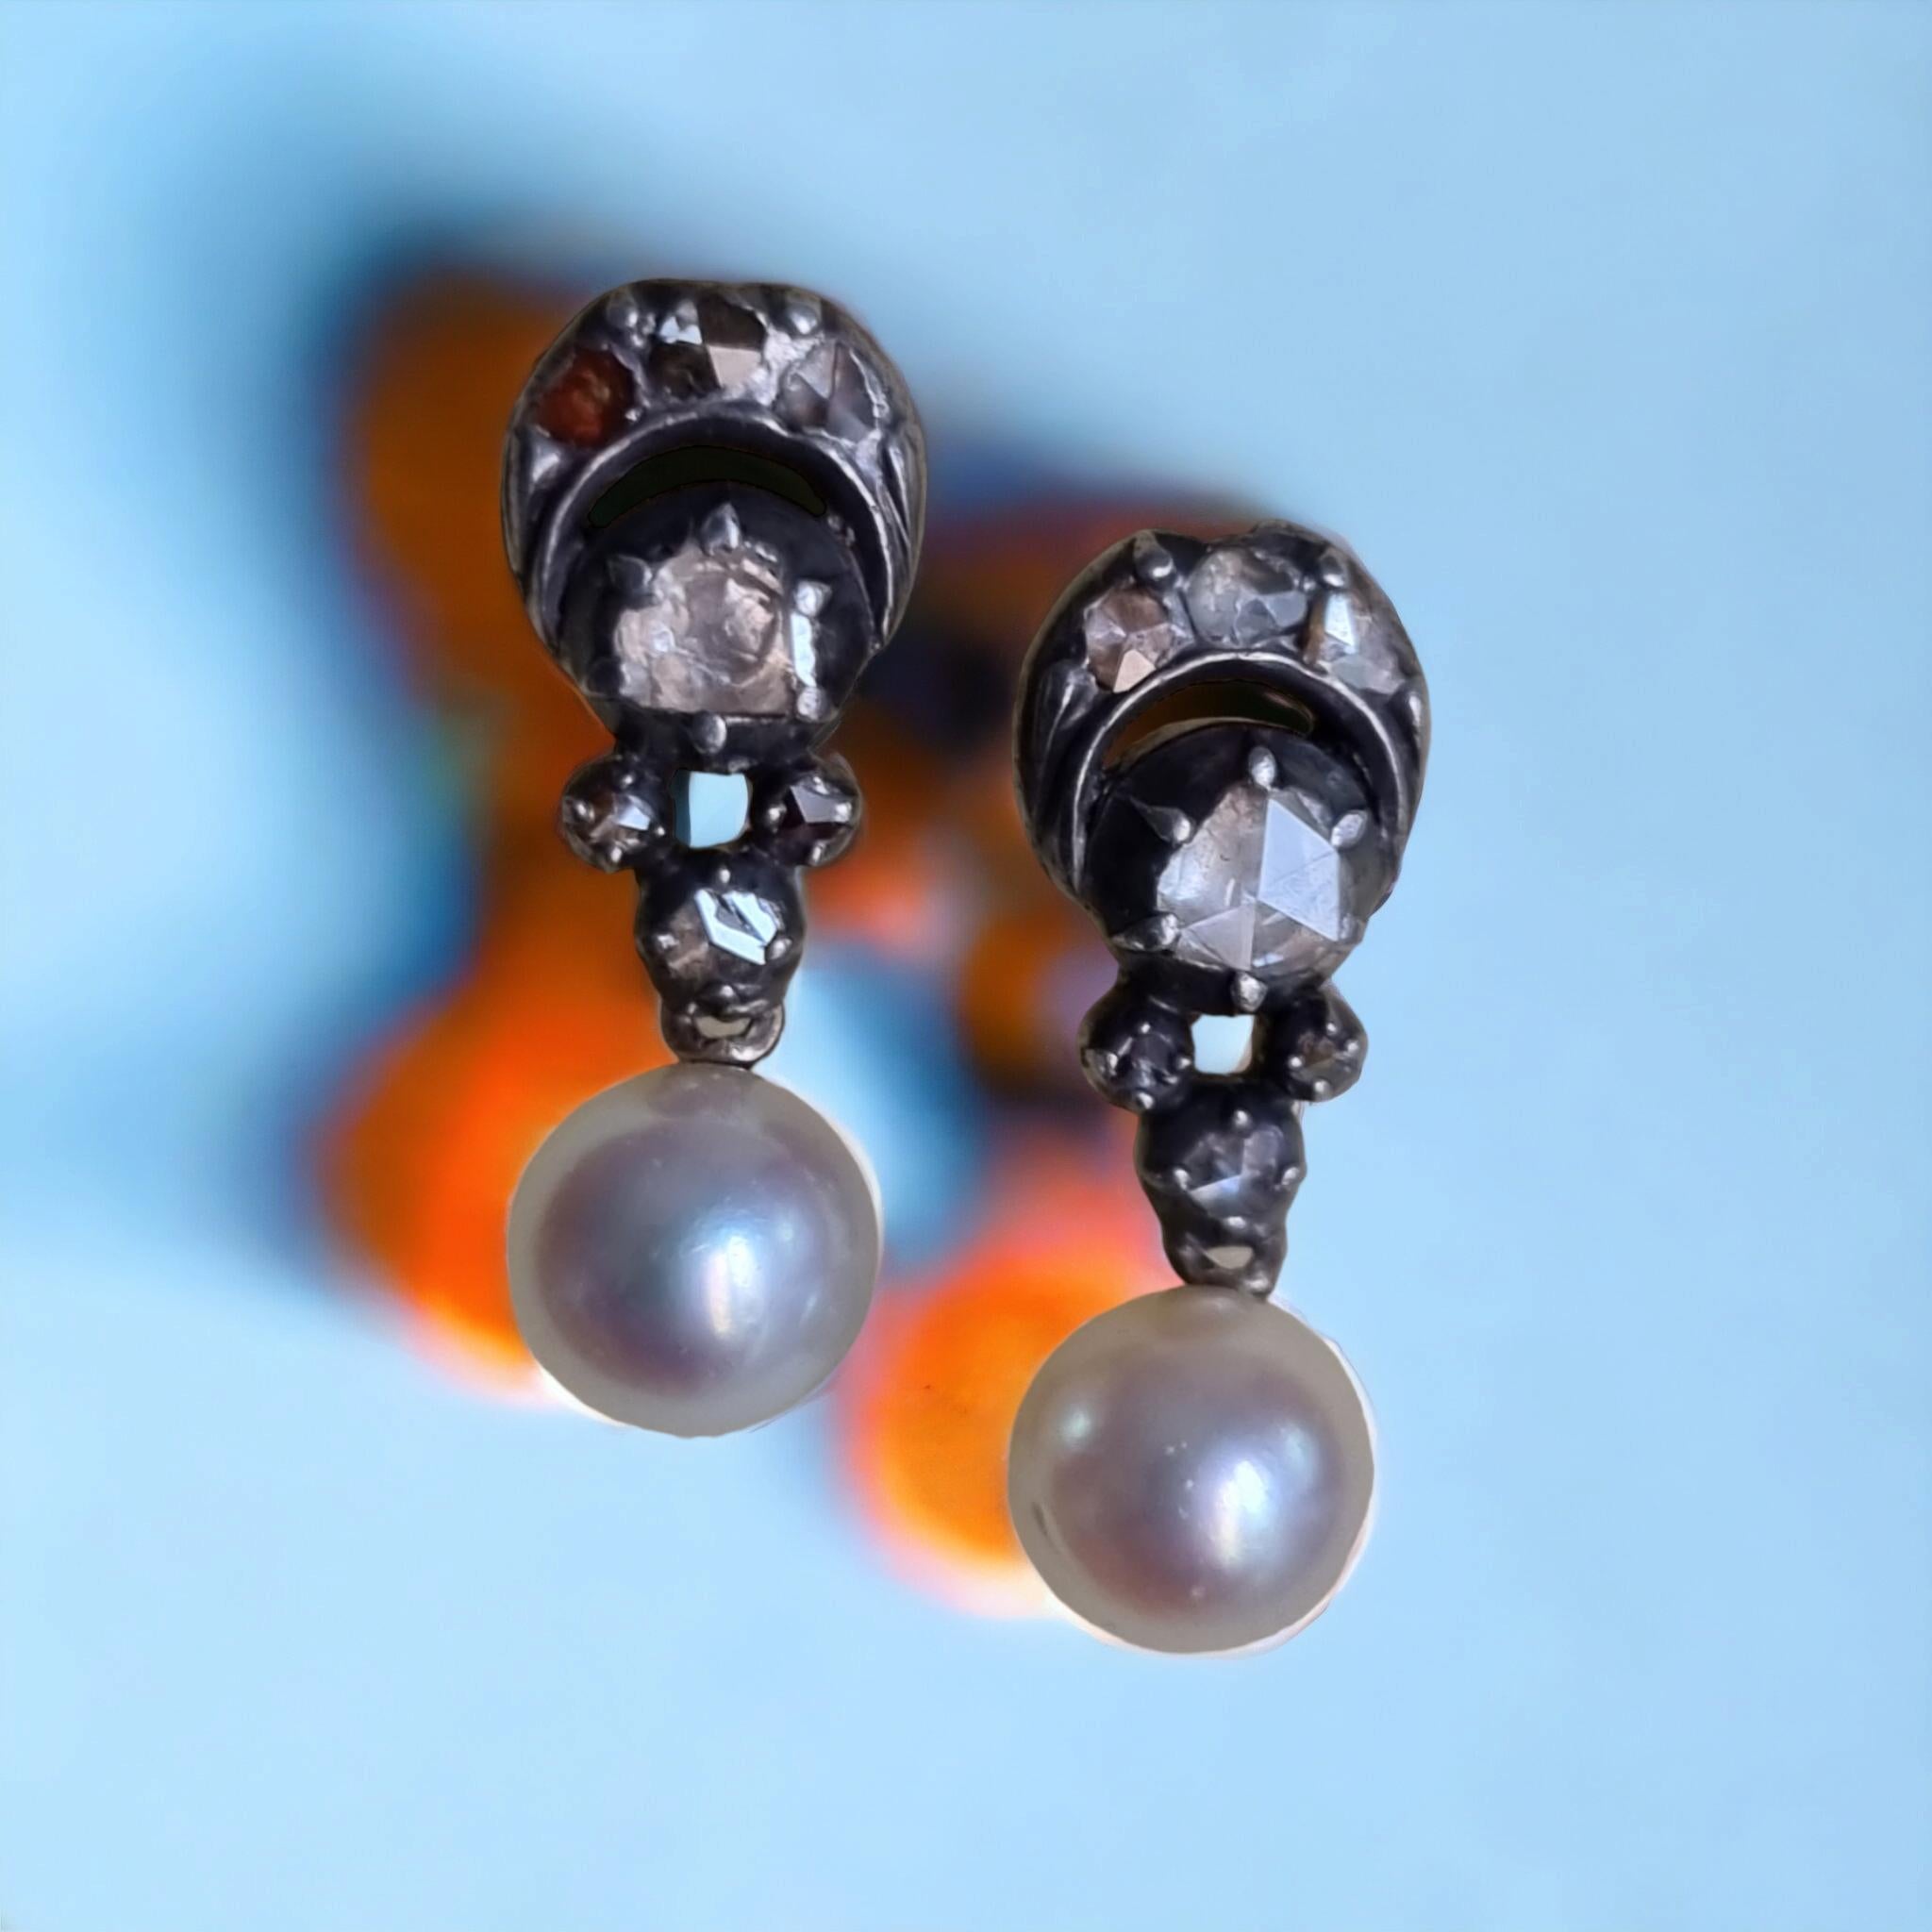 Antique Georgian Diamond and Pearl Dangle Earrings. 

Rare and ravishing Georgian era pair of earrings. Hand fabricated in silver over gold dating back to the early 1800s (19th Century). It consists of 2 central and 12 smaller glittering rose-cut